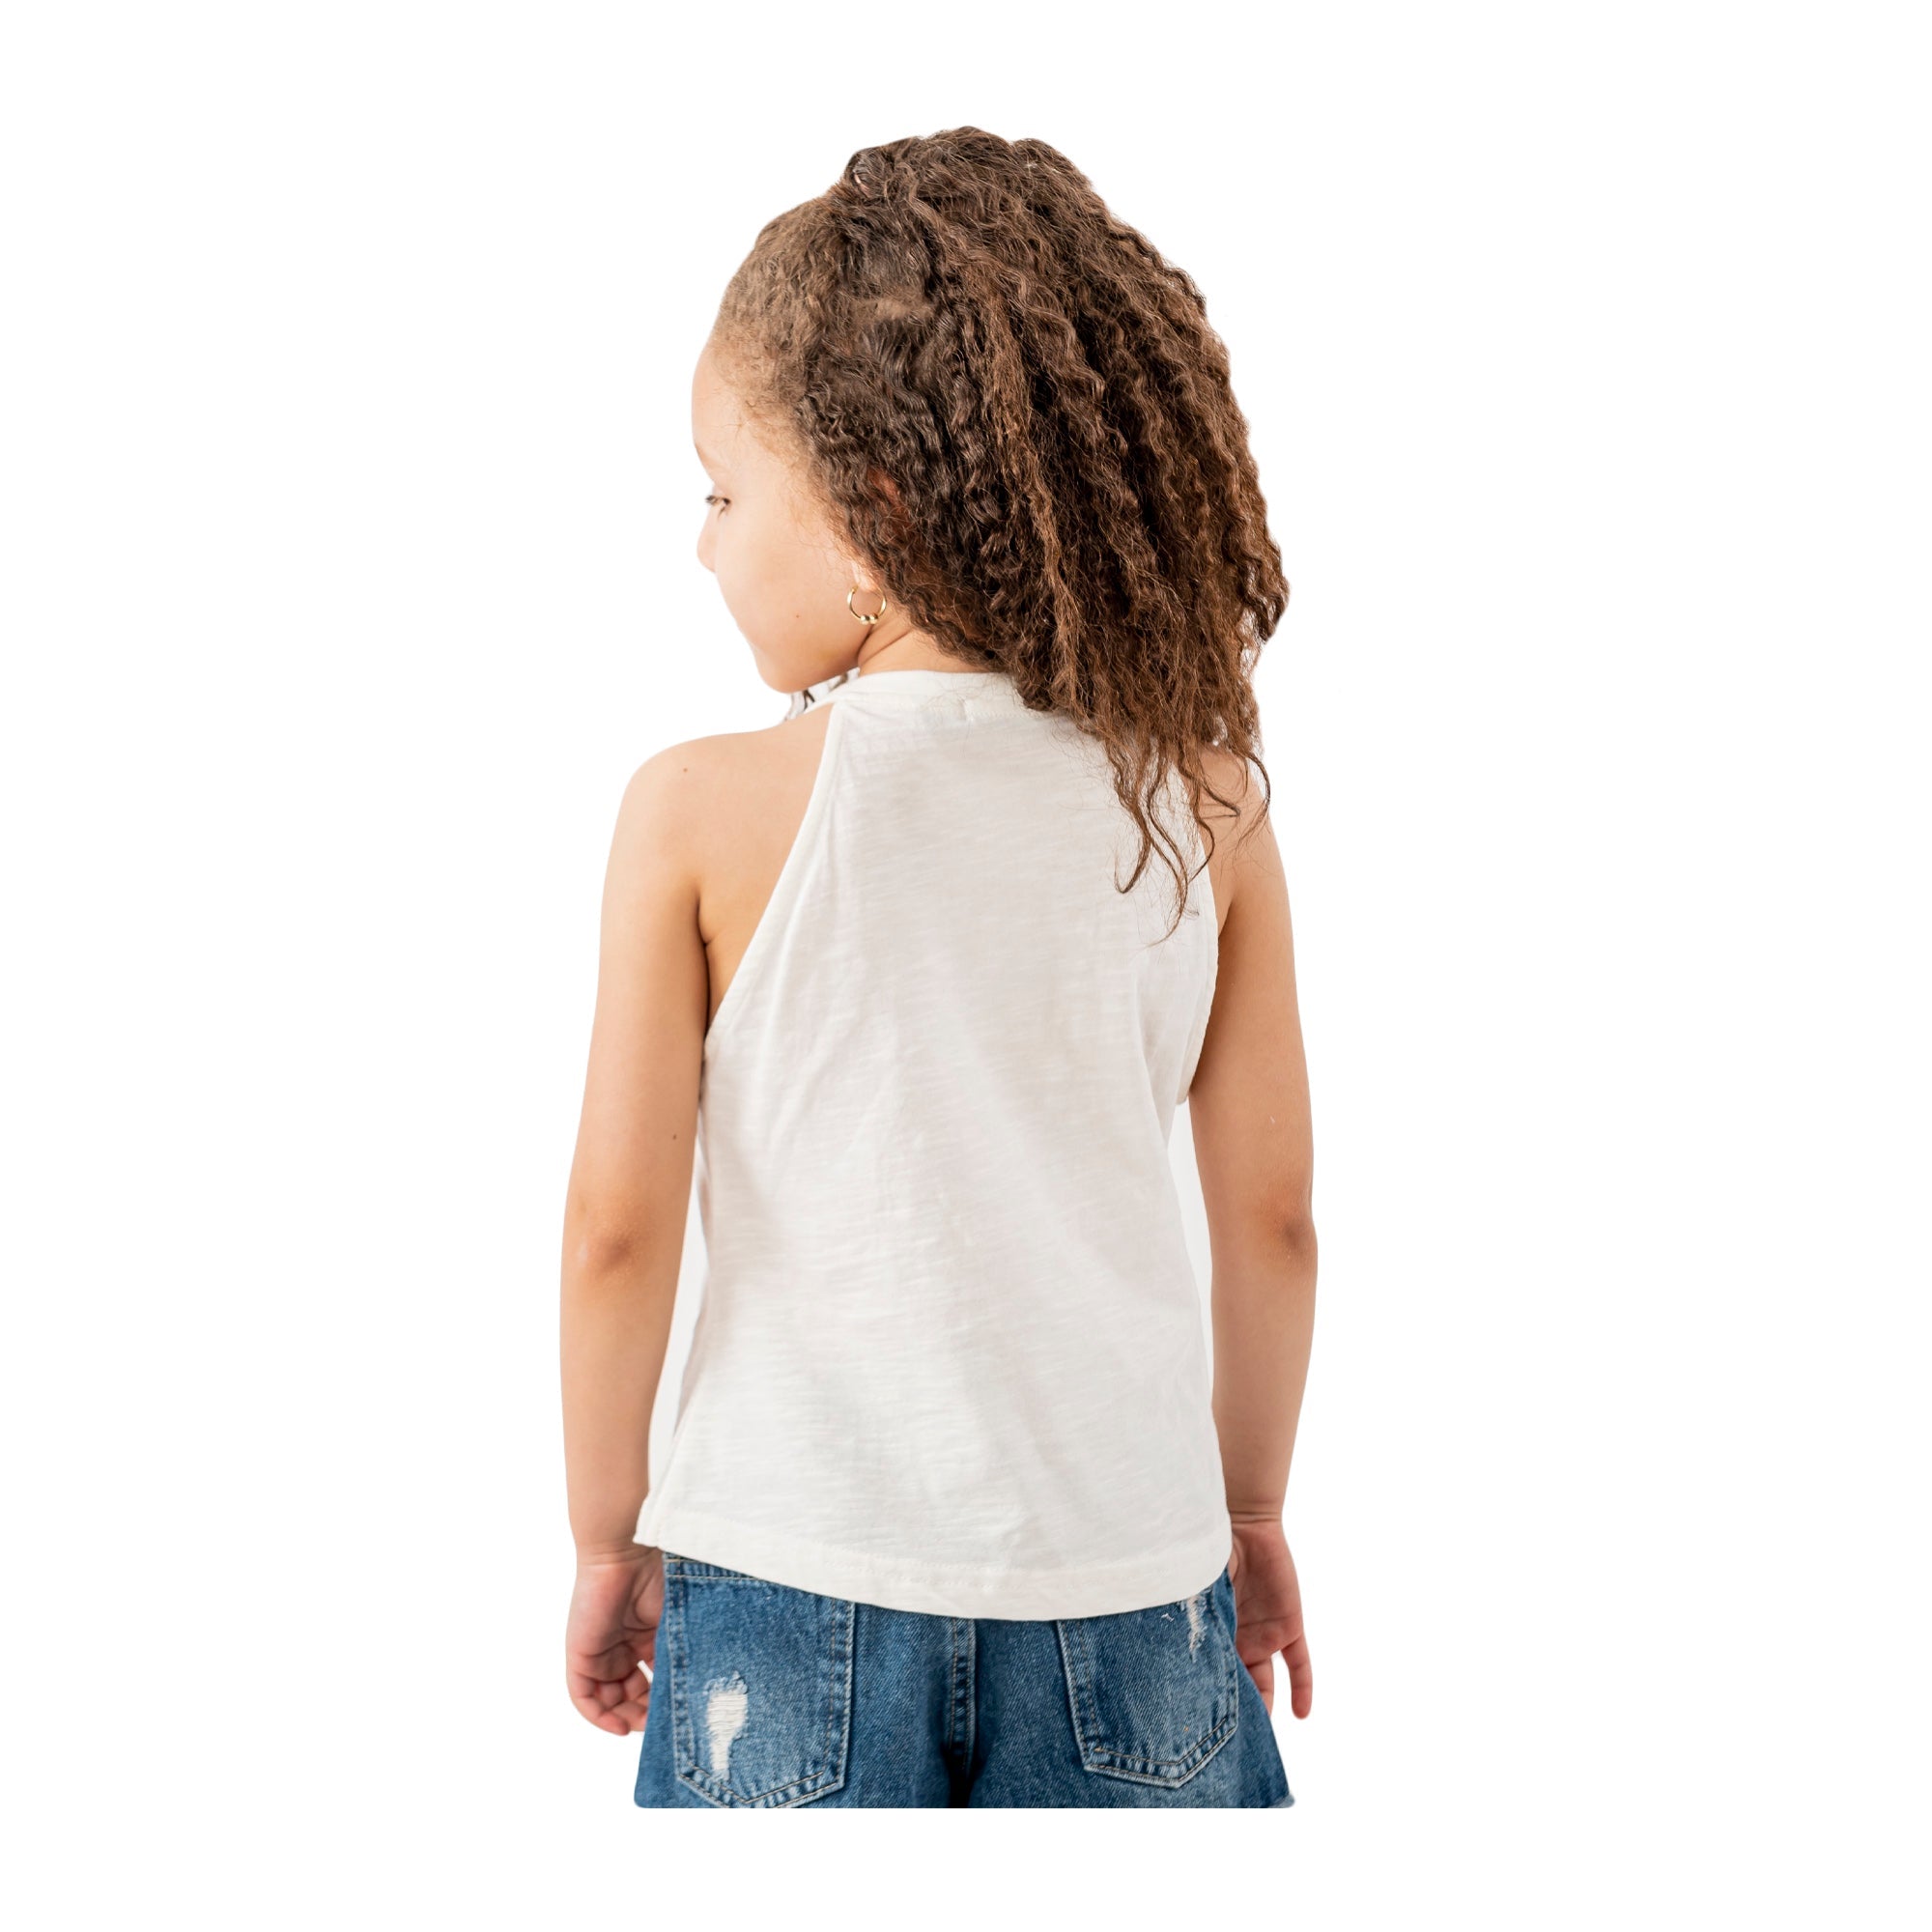 Venti Broderie T-Shirt With Open Neck White for Girl 404022, Target Gender: Girls, Color Family: Multicolor, Material: Cotton, Target Age: 12 - 18 Months, 3 image